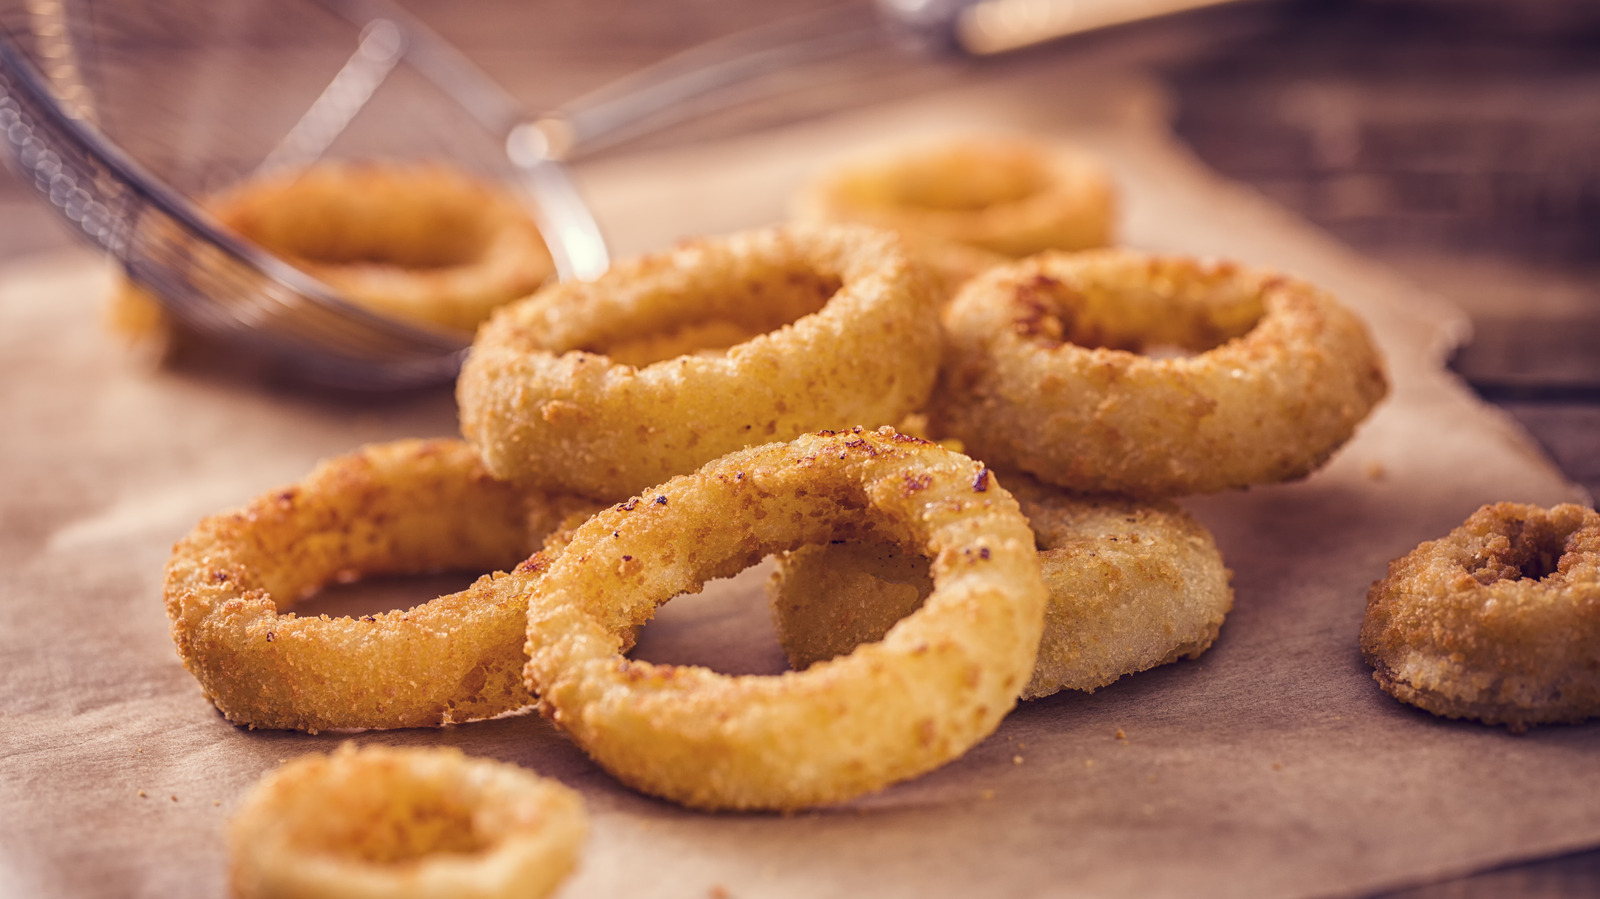 https://www.thedailymeal.com/img/gallery/10-fast-food-onion-rings-ranked-worst-to-first/l-intro-1688053411.jpg